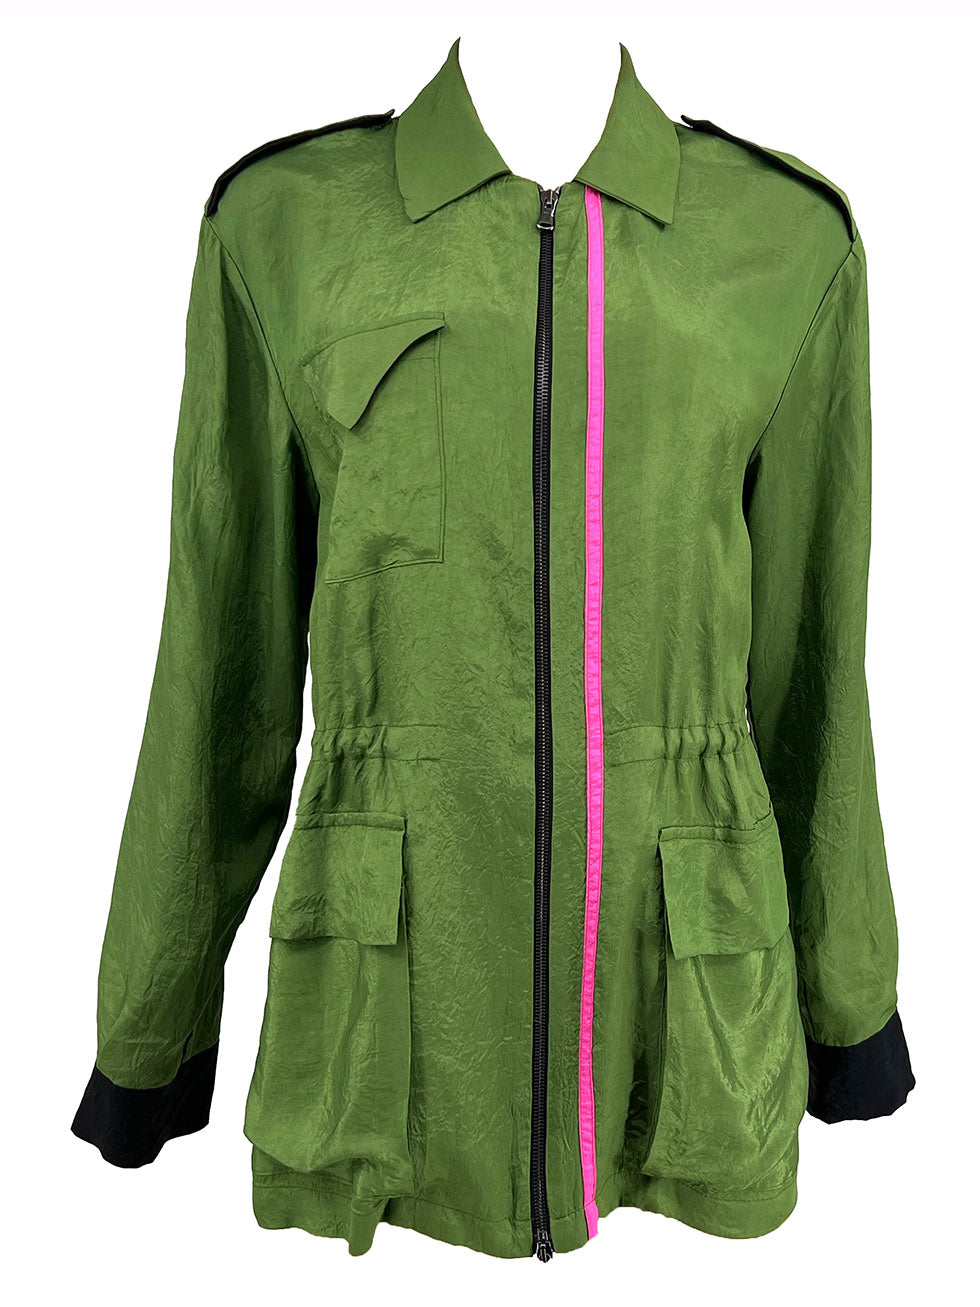 Green Combat Jacket with Pink Stripe - MADE TO ORDER